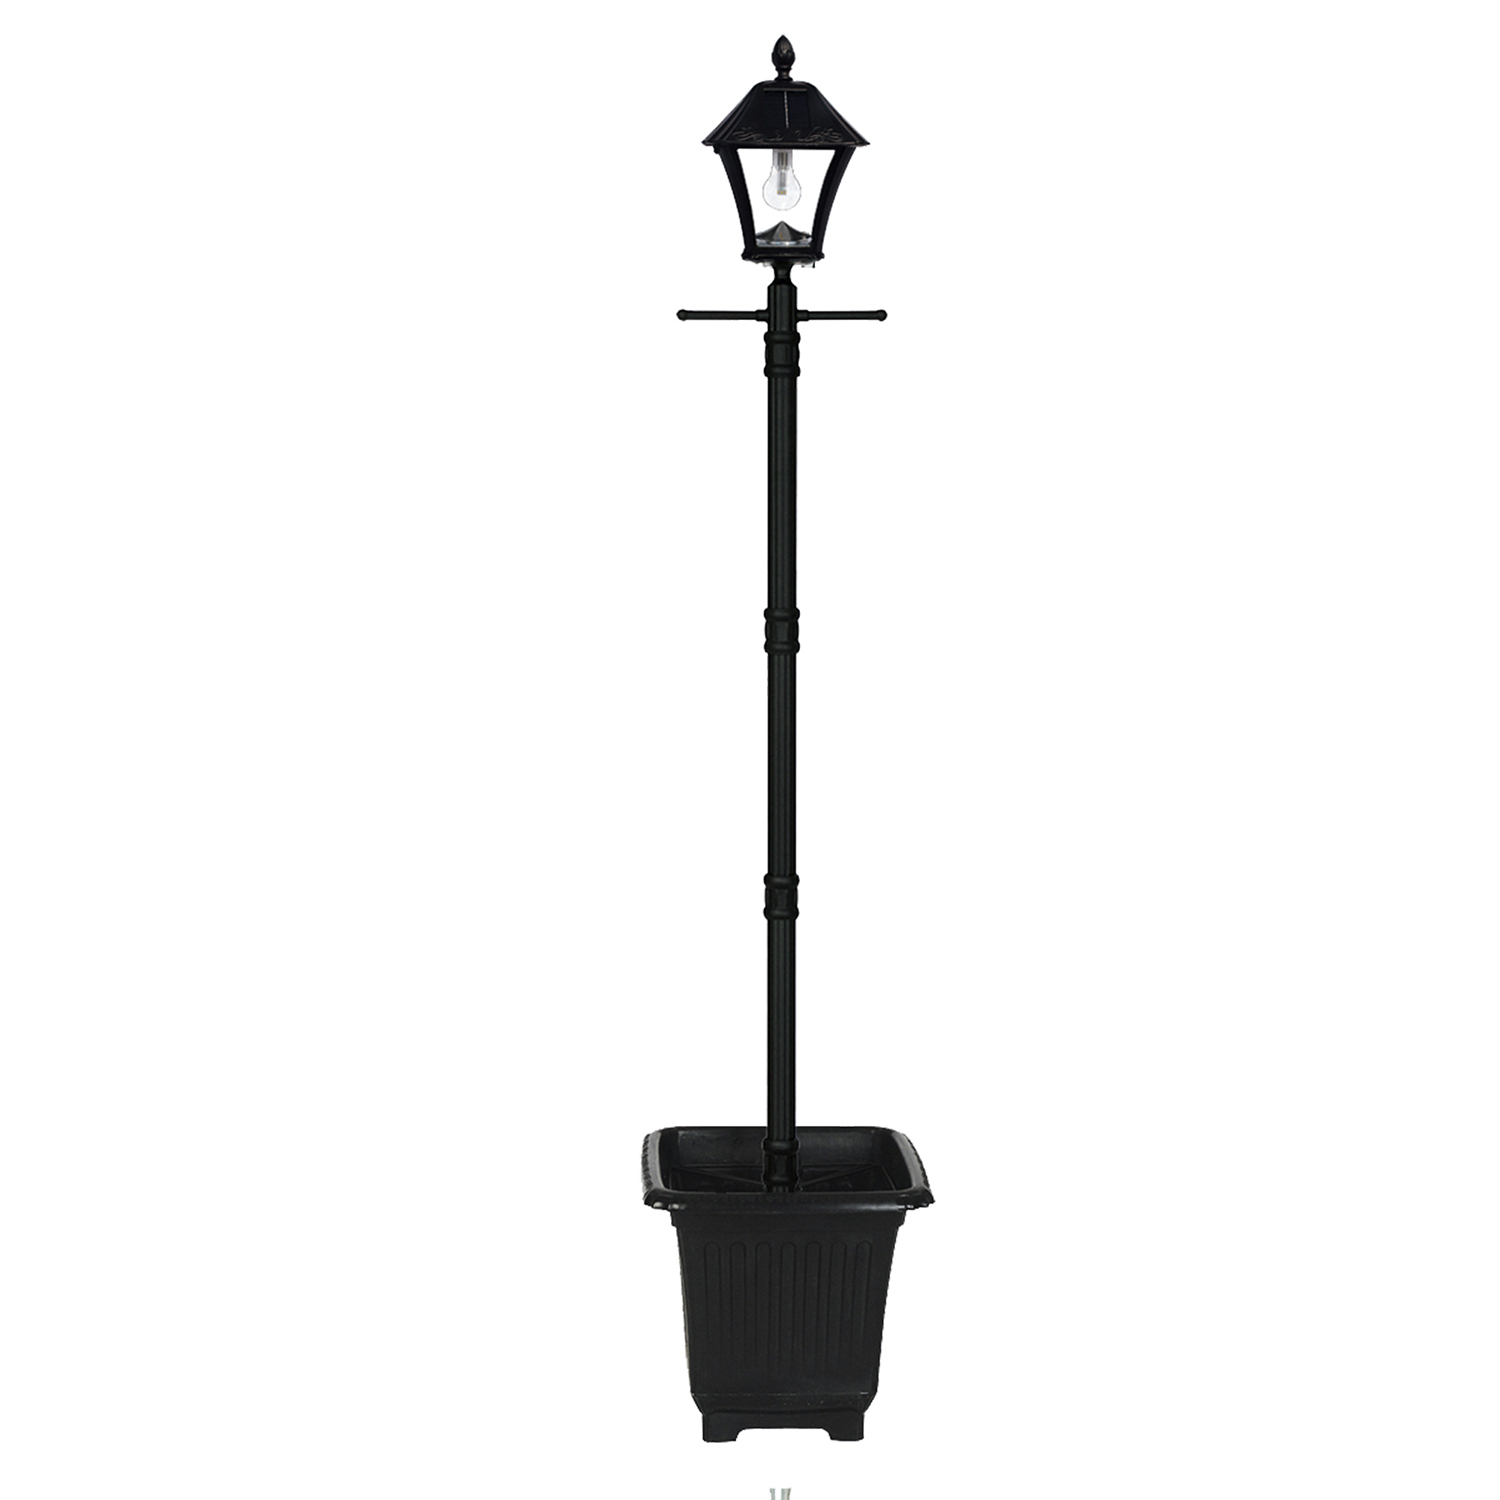 Gama Sonic Baytown Bulb Solar Lamp Post, How To Install Outdoor Solar Lamp Post In Nigeria